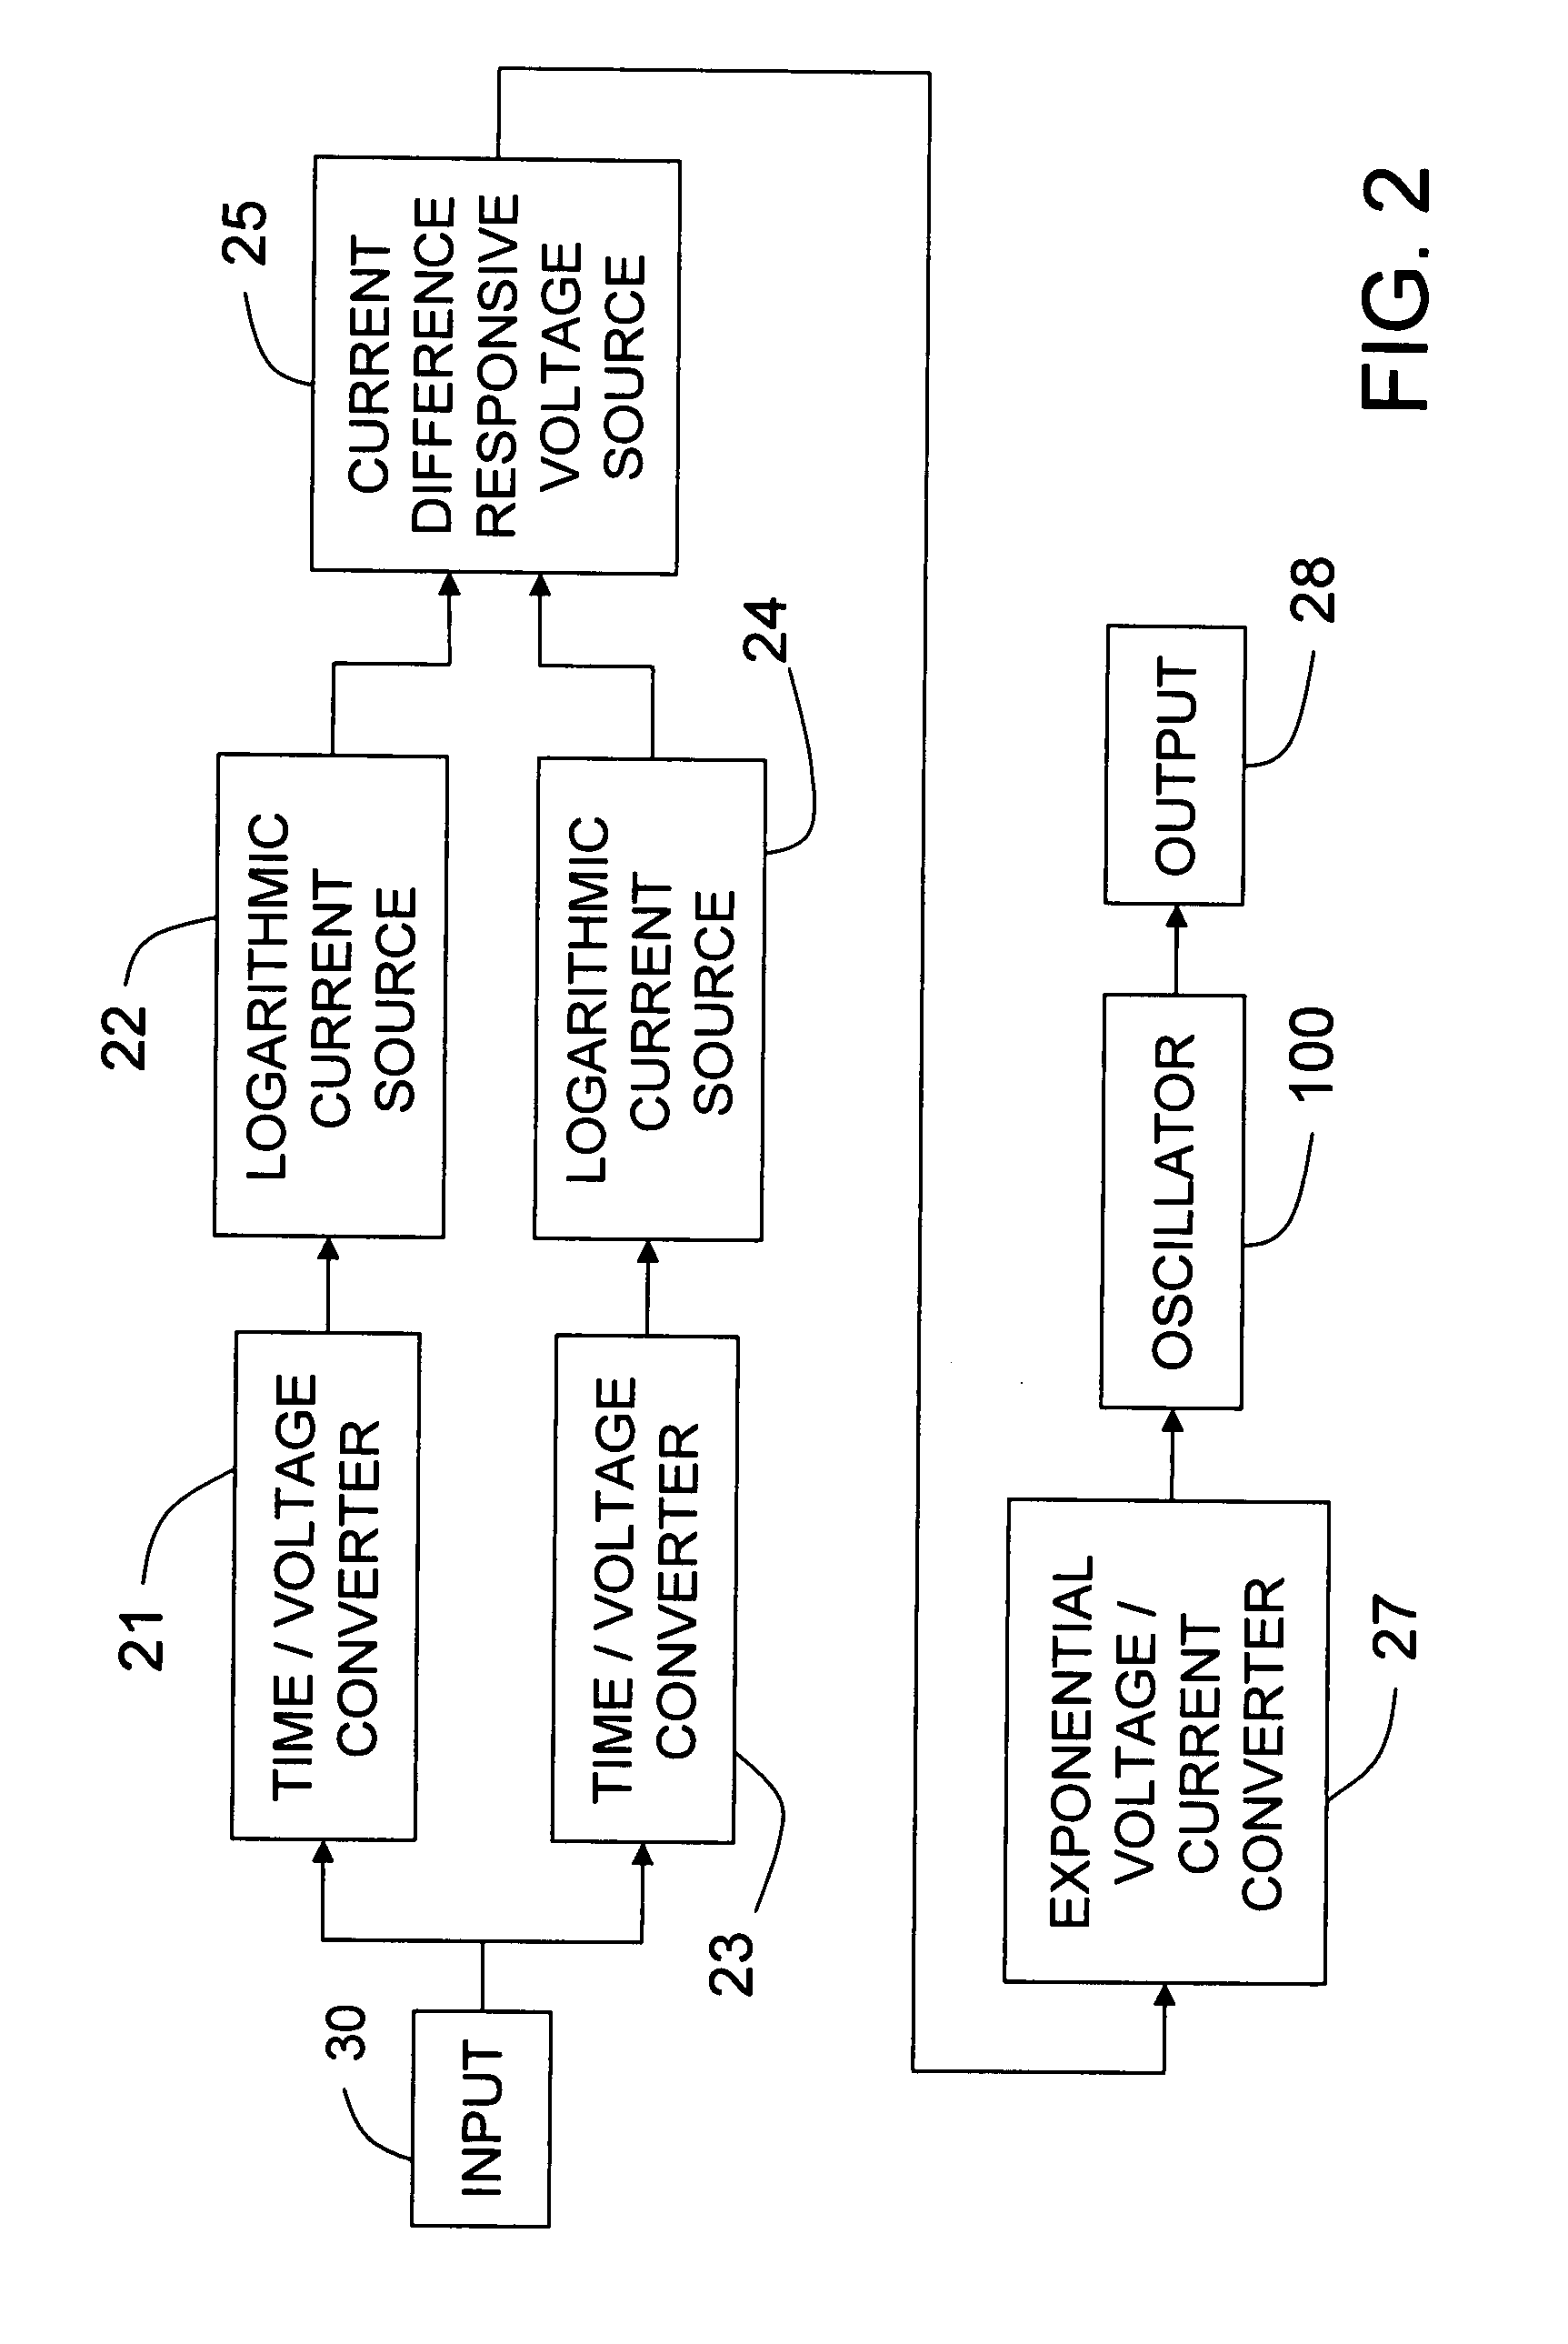 Analog duty cycle replicating frequency converter for pwm signals